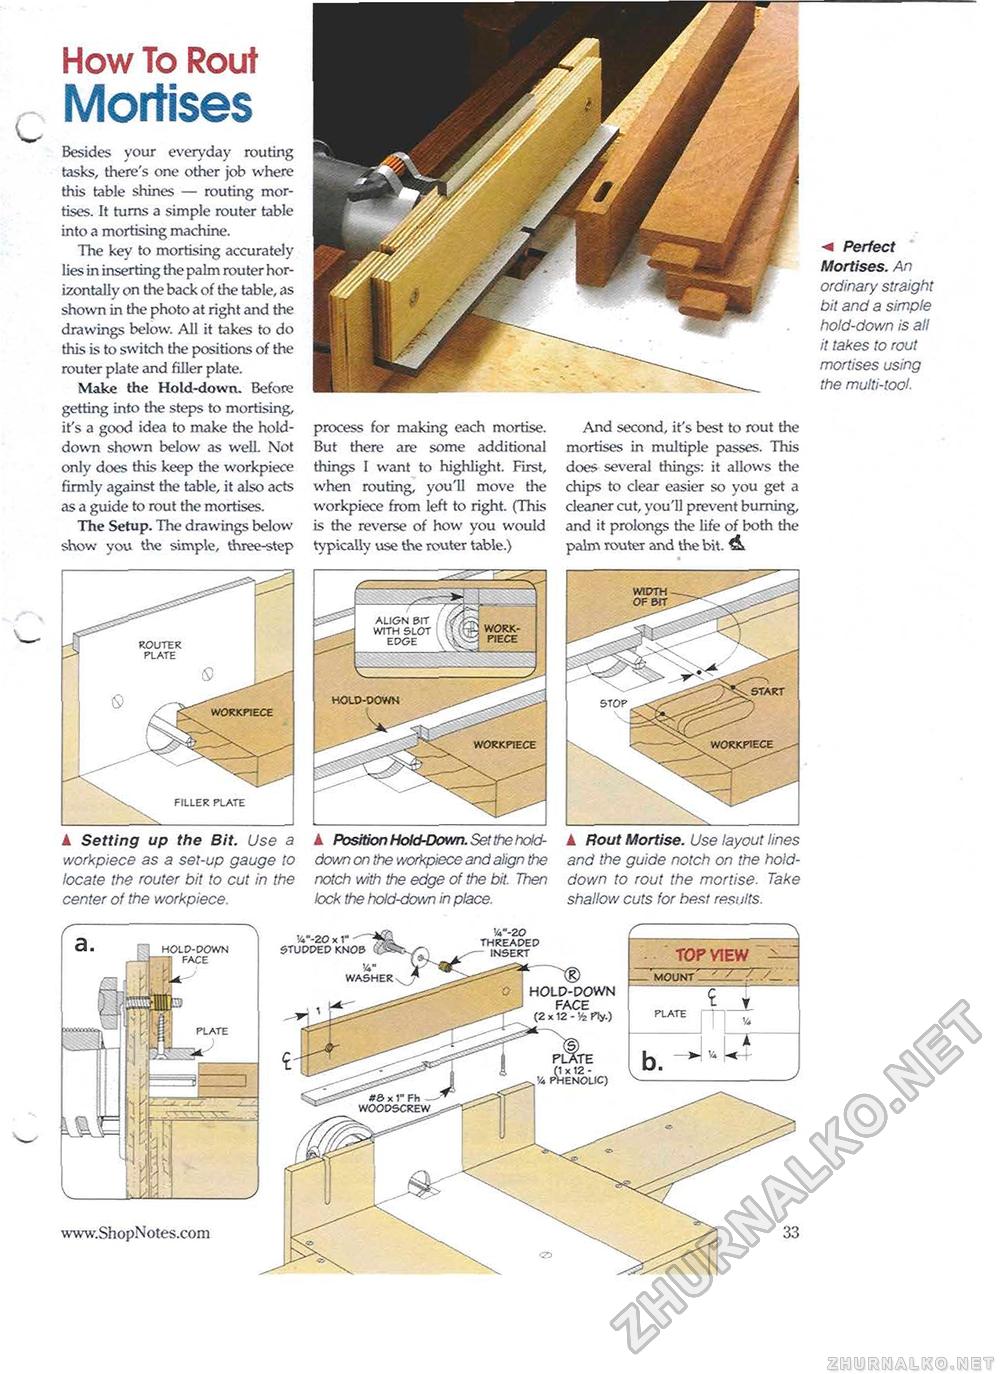 90 - Get the Most out of a Plunge Router,  33